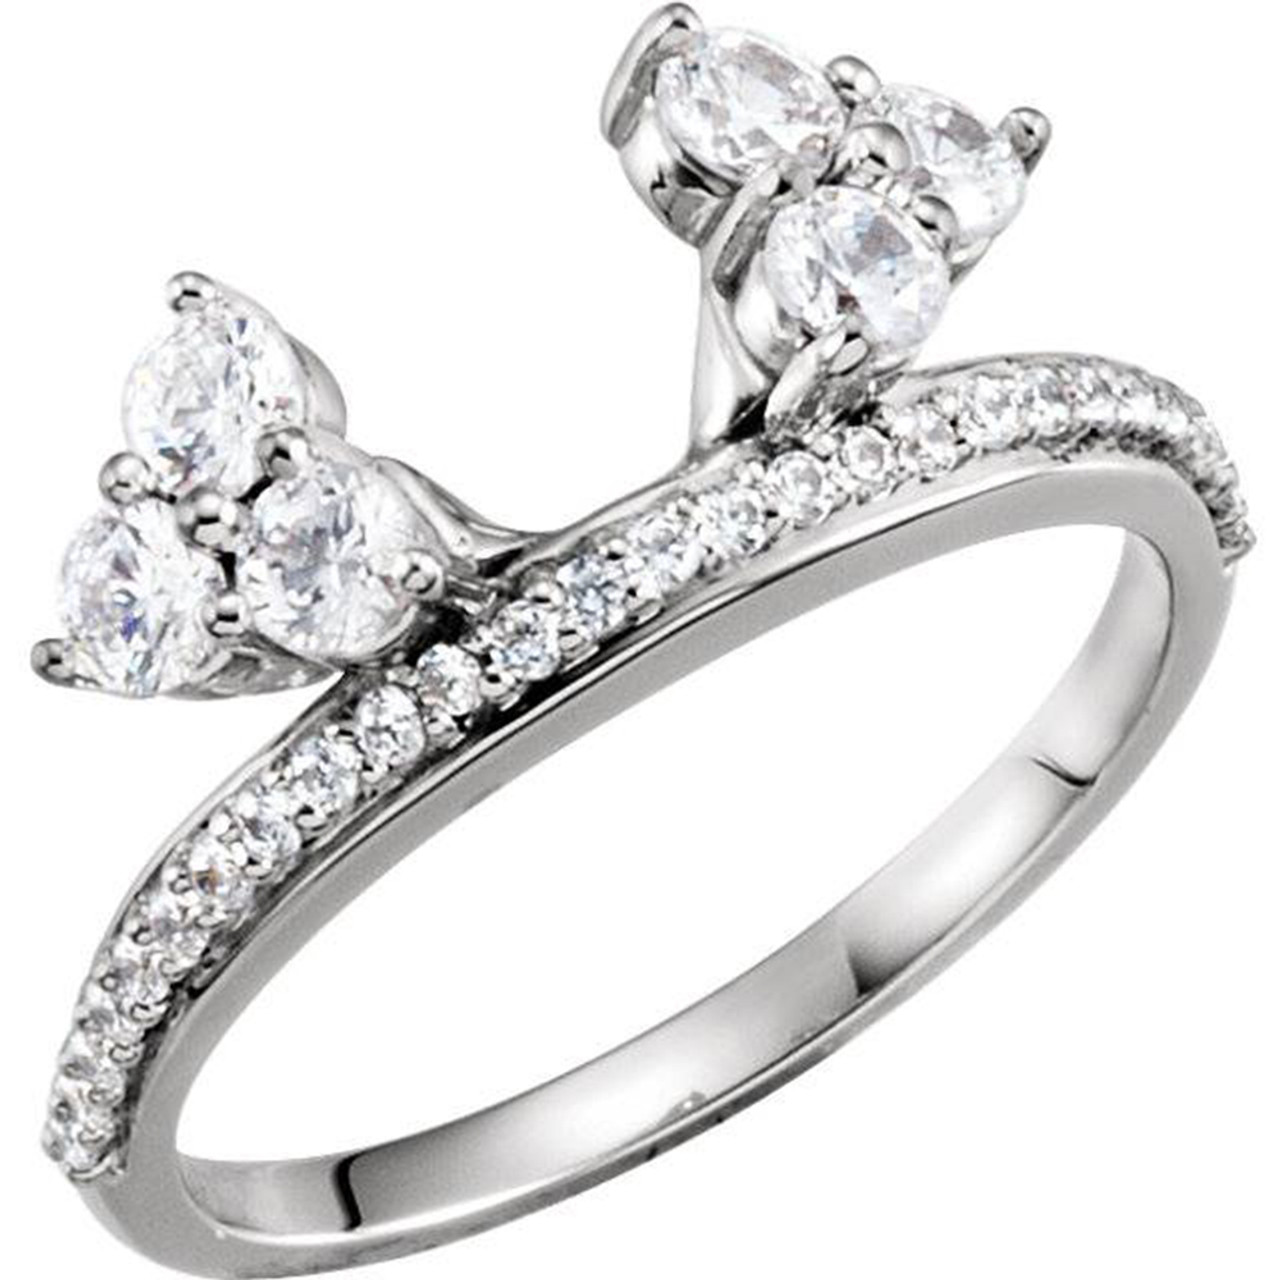 17 Unique And Beautiful Fashion Diamond Rings For Ladies, 51% OFF